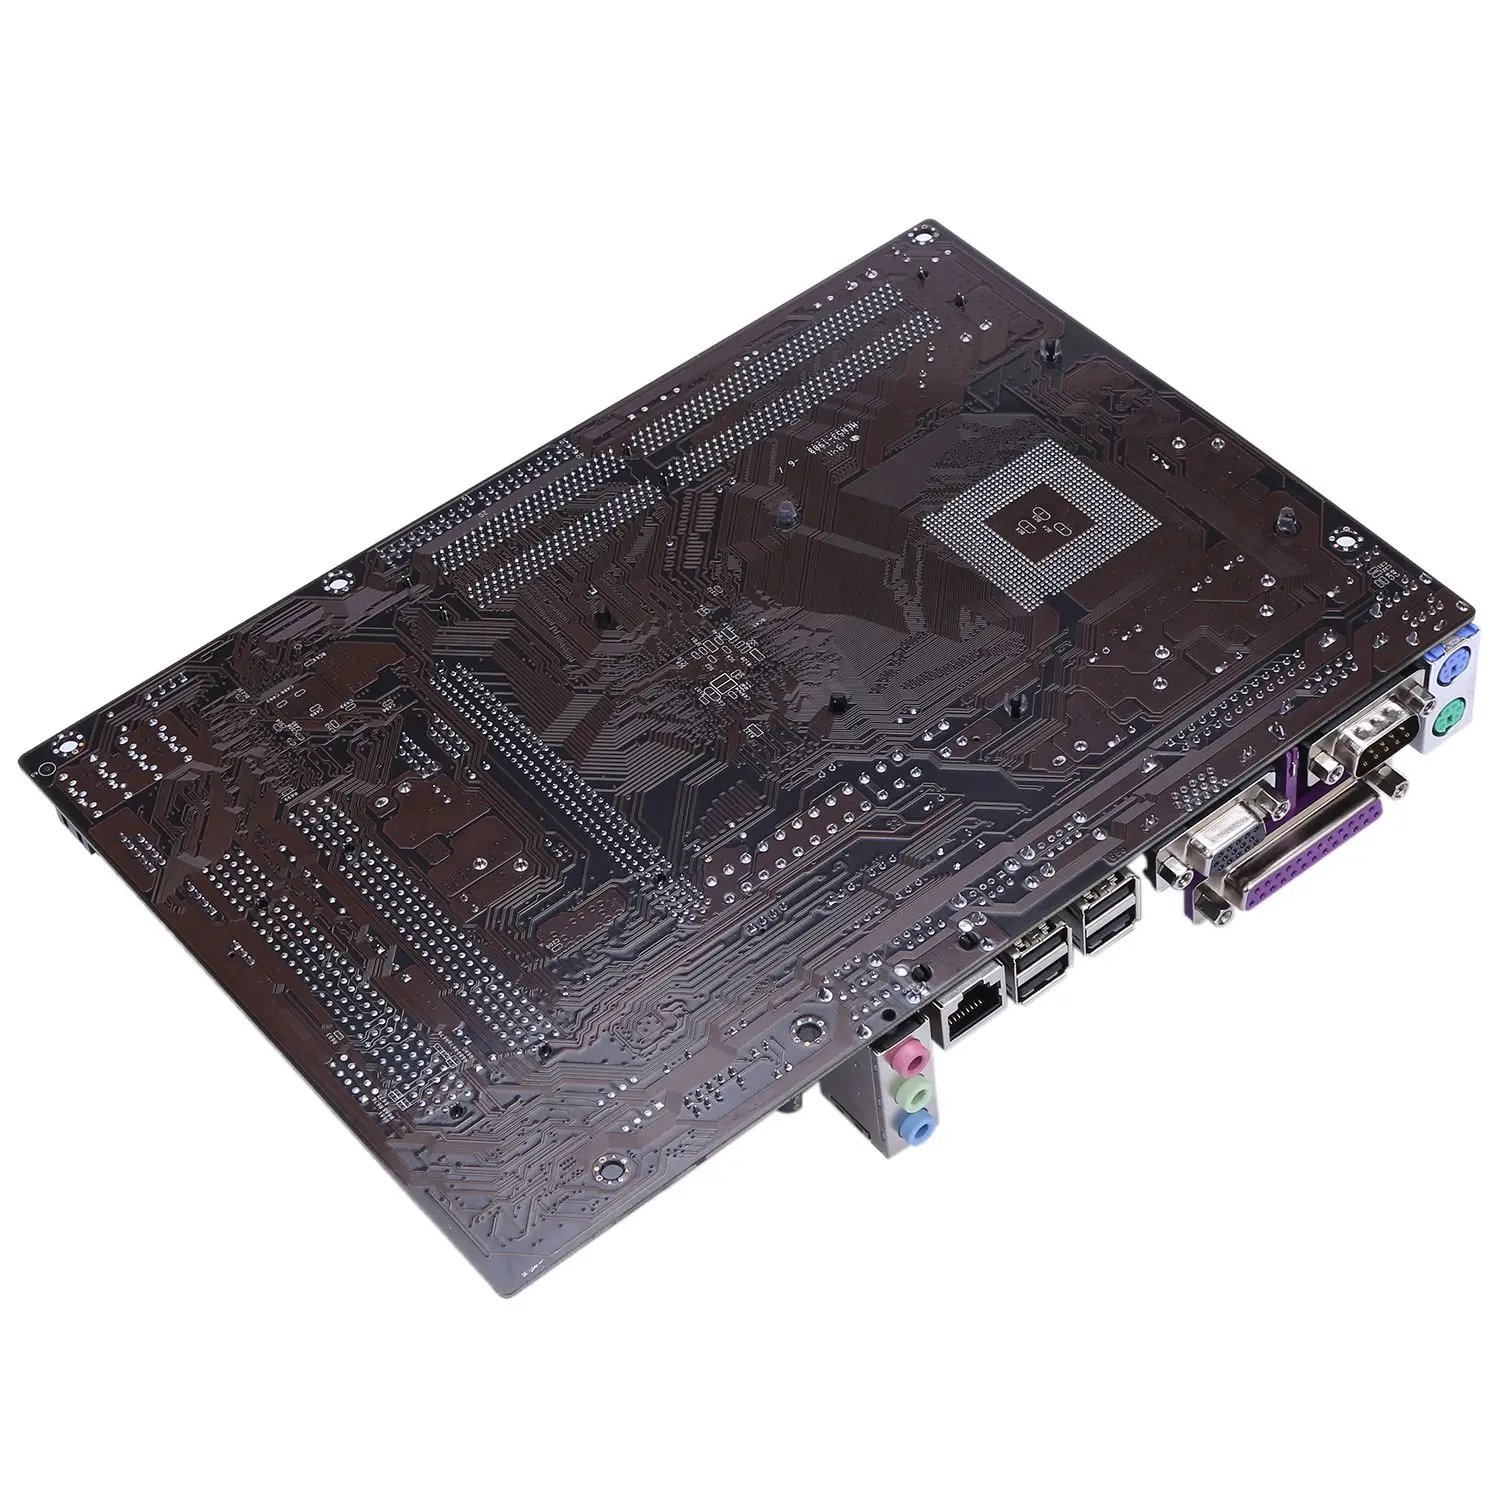 G41 Desktop Motherboard For Intel Cpu Set With Quad Core 2.66G Cpu E5430 + 4G Memory + Fan Atx Computer Mainboard Assemble Set images - 6